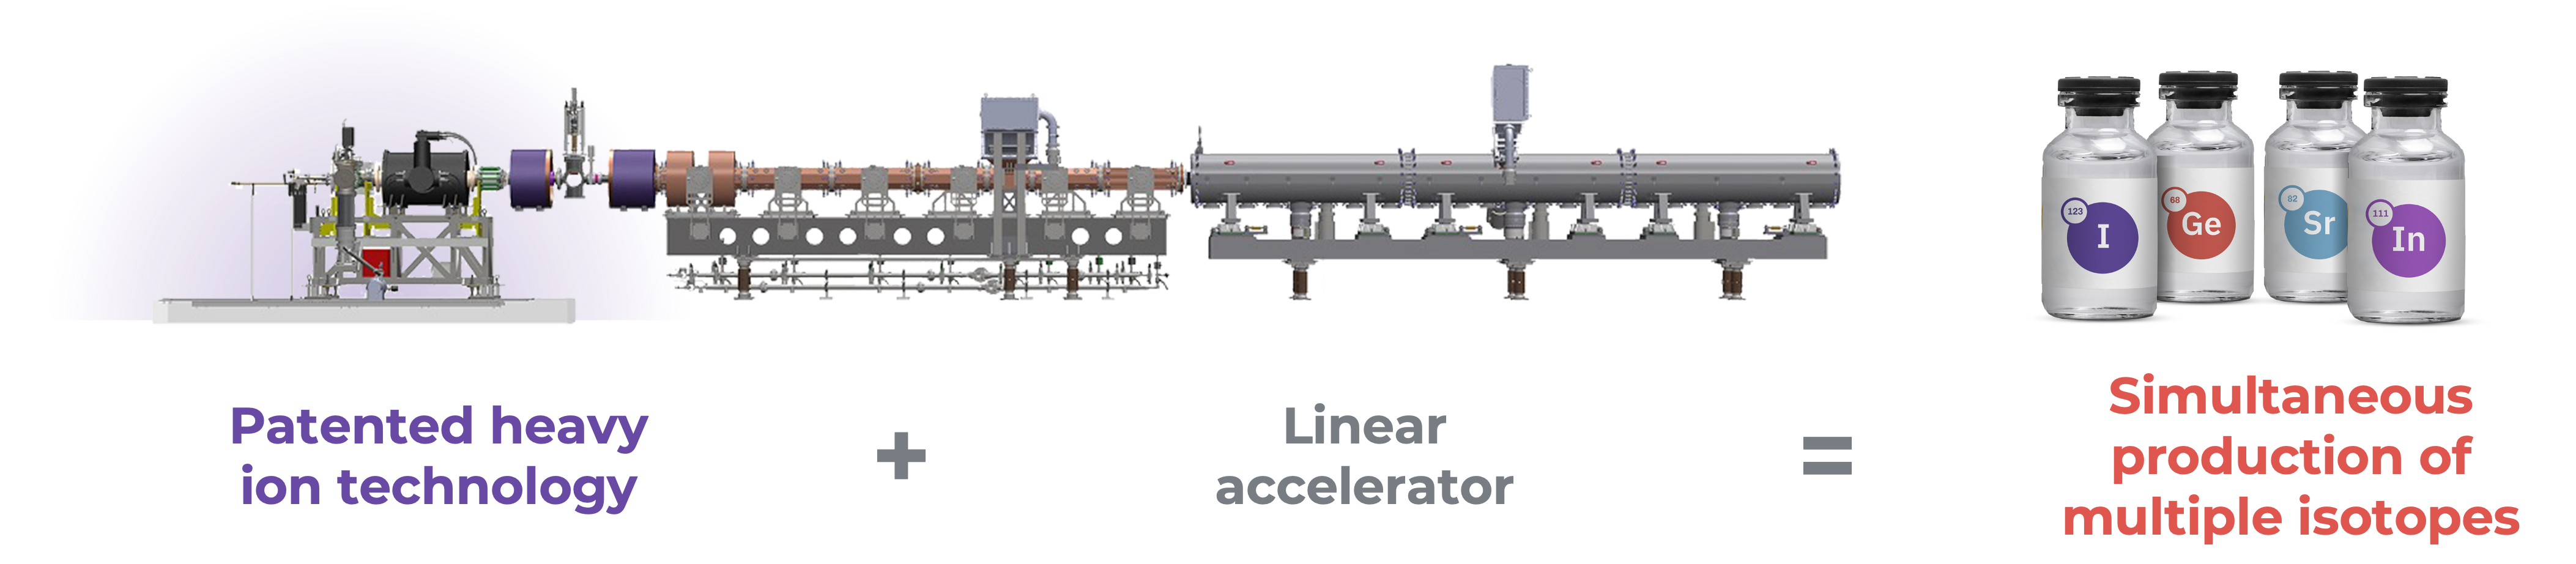 Image of linear accelerator and resulting isotopes